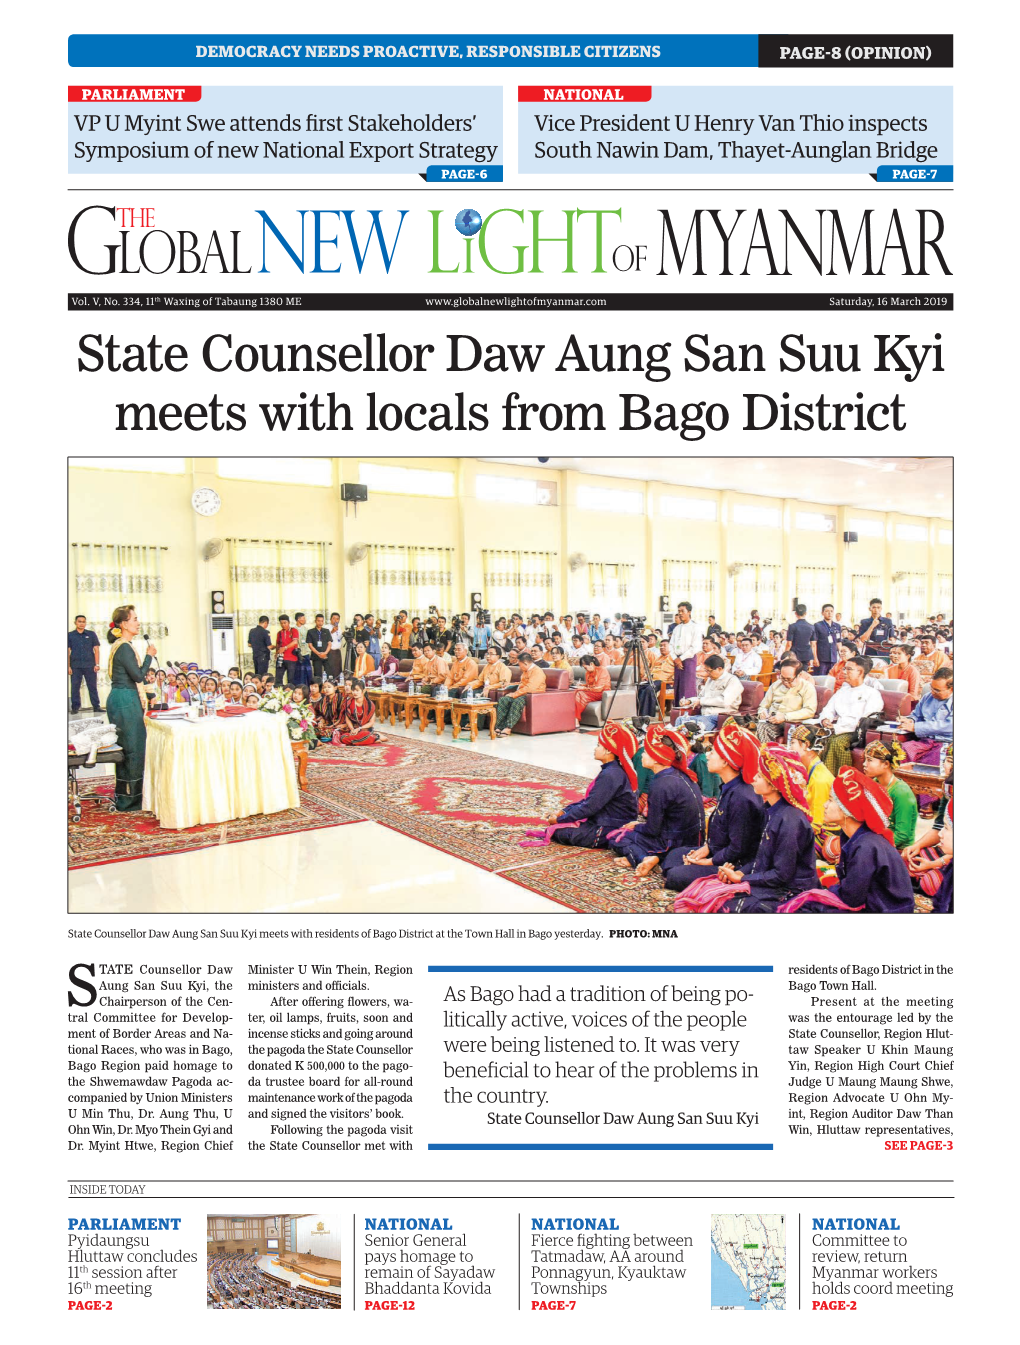 State Counsellor Daw Aung San Suu Kyi Meets with Locals from Bago District